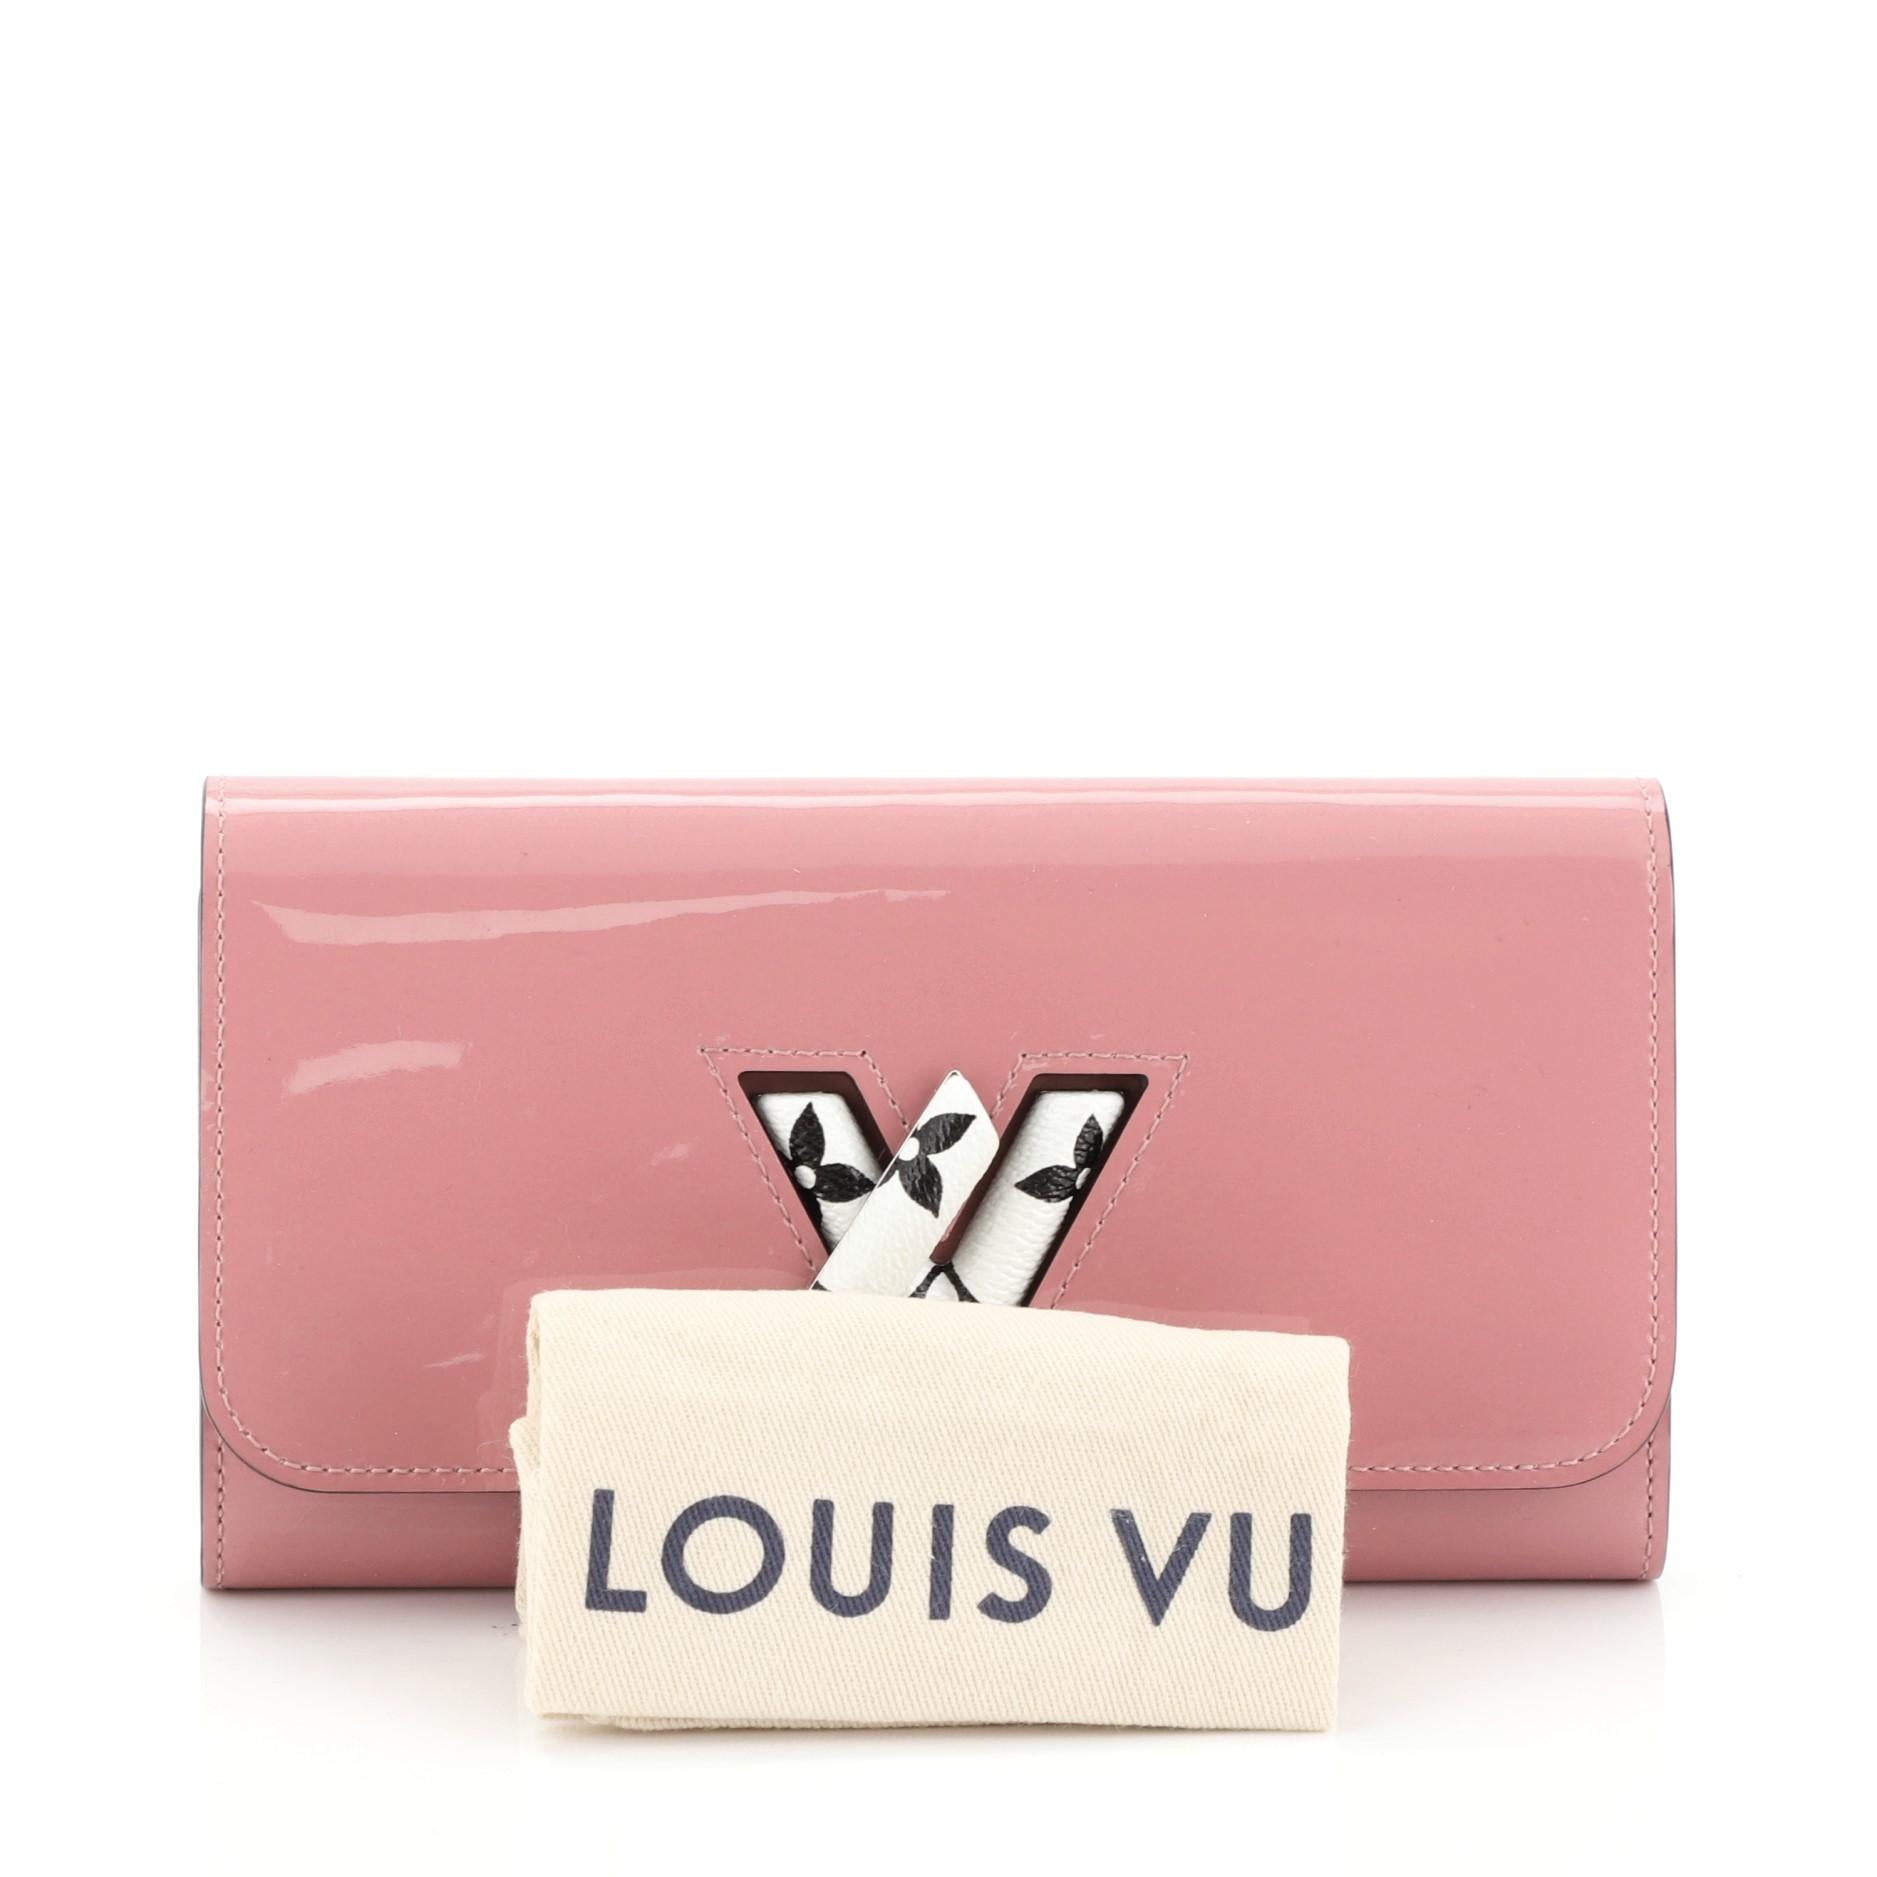 This Louis Vuitton Twist Wallet Vernis with Monogram Canvas, crafted from pink vernis with monogram canvas, features silver-tone hardware. Its LV twist lock closure opens to a pink leather interior with multiple card slots, middle zip coin pocket,